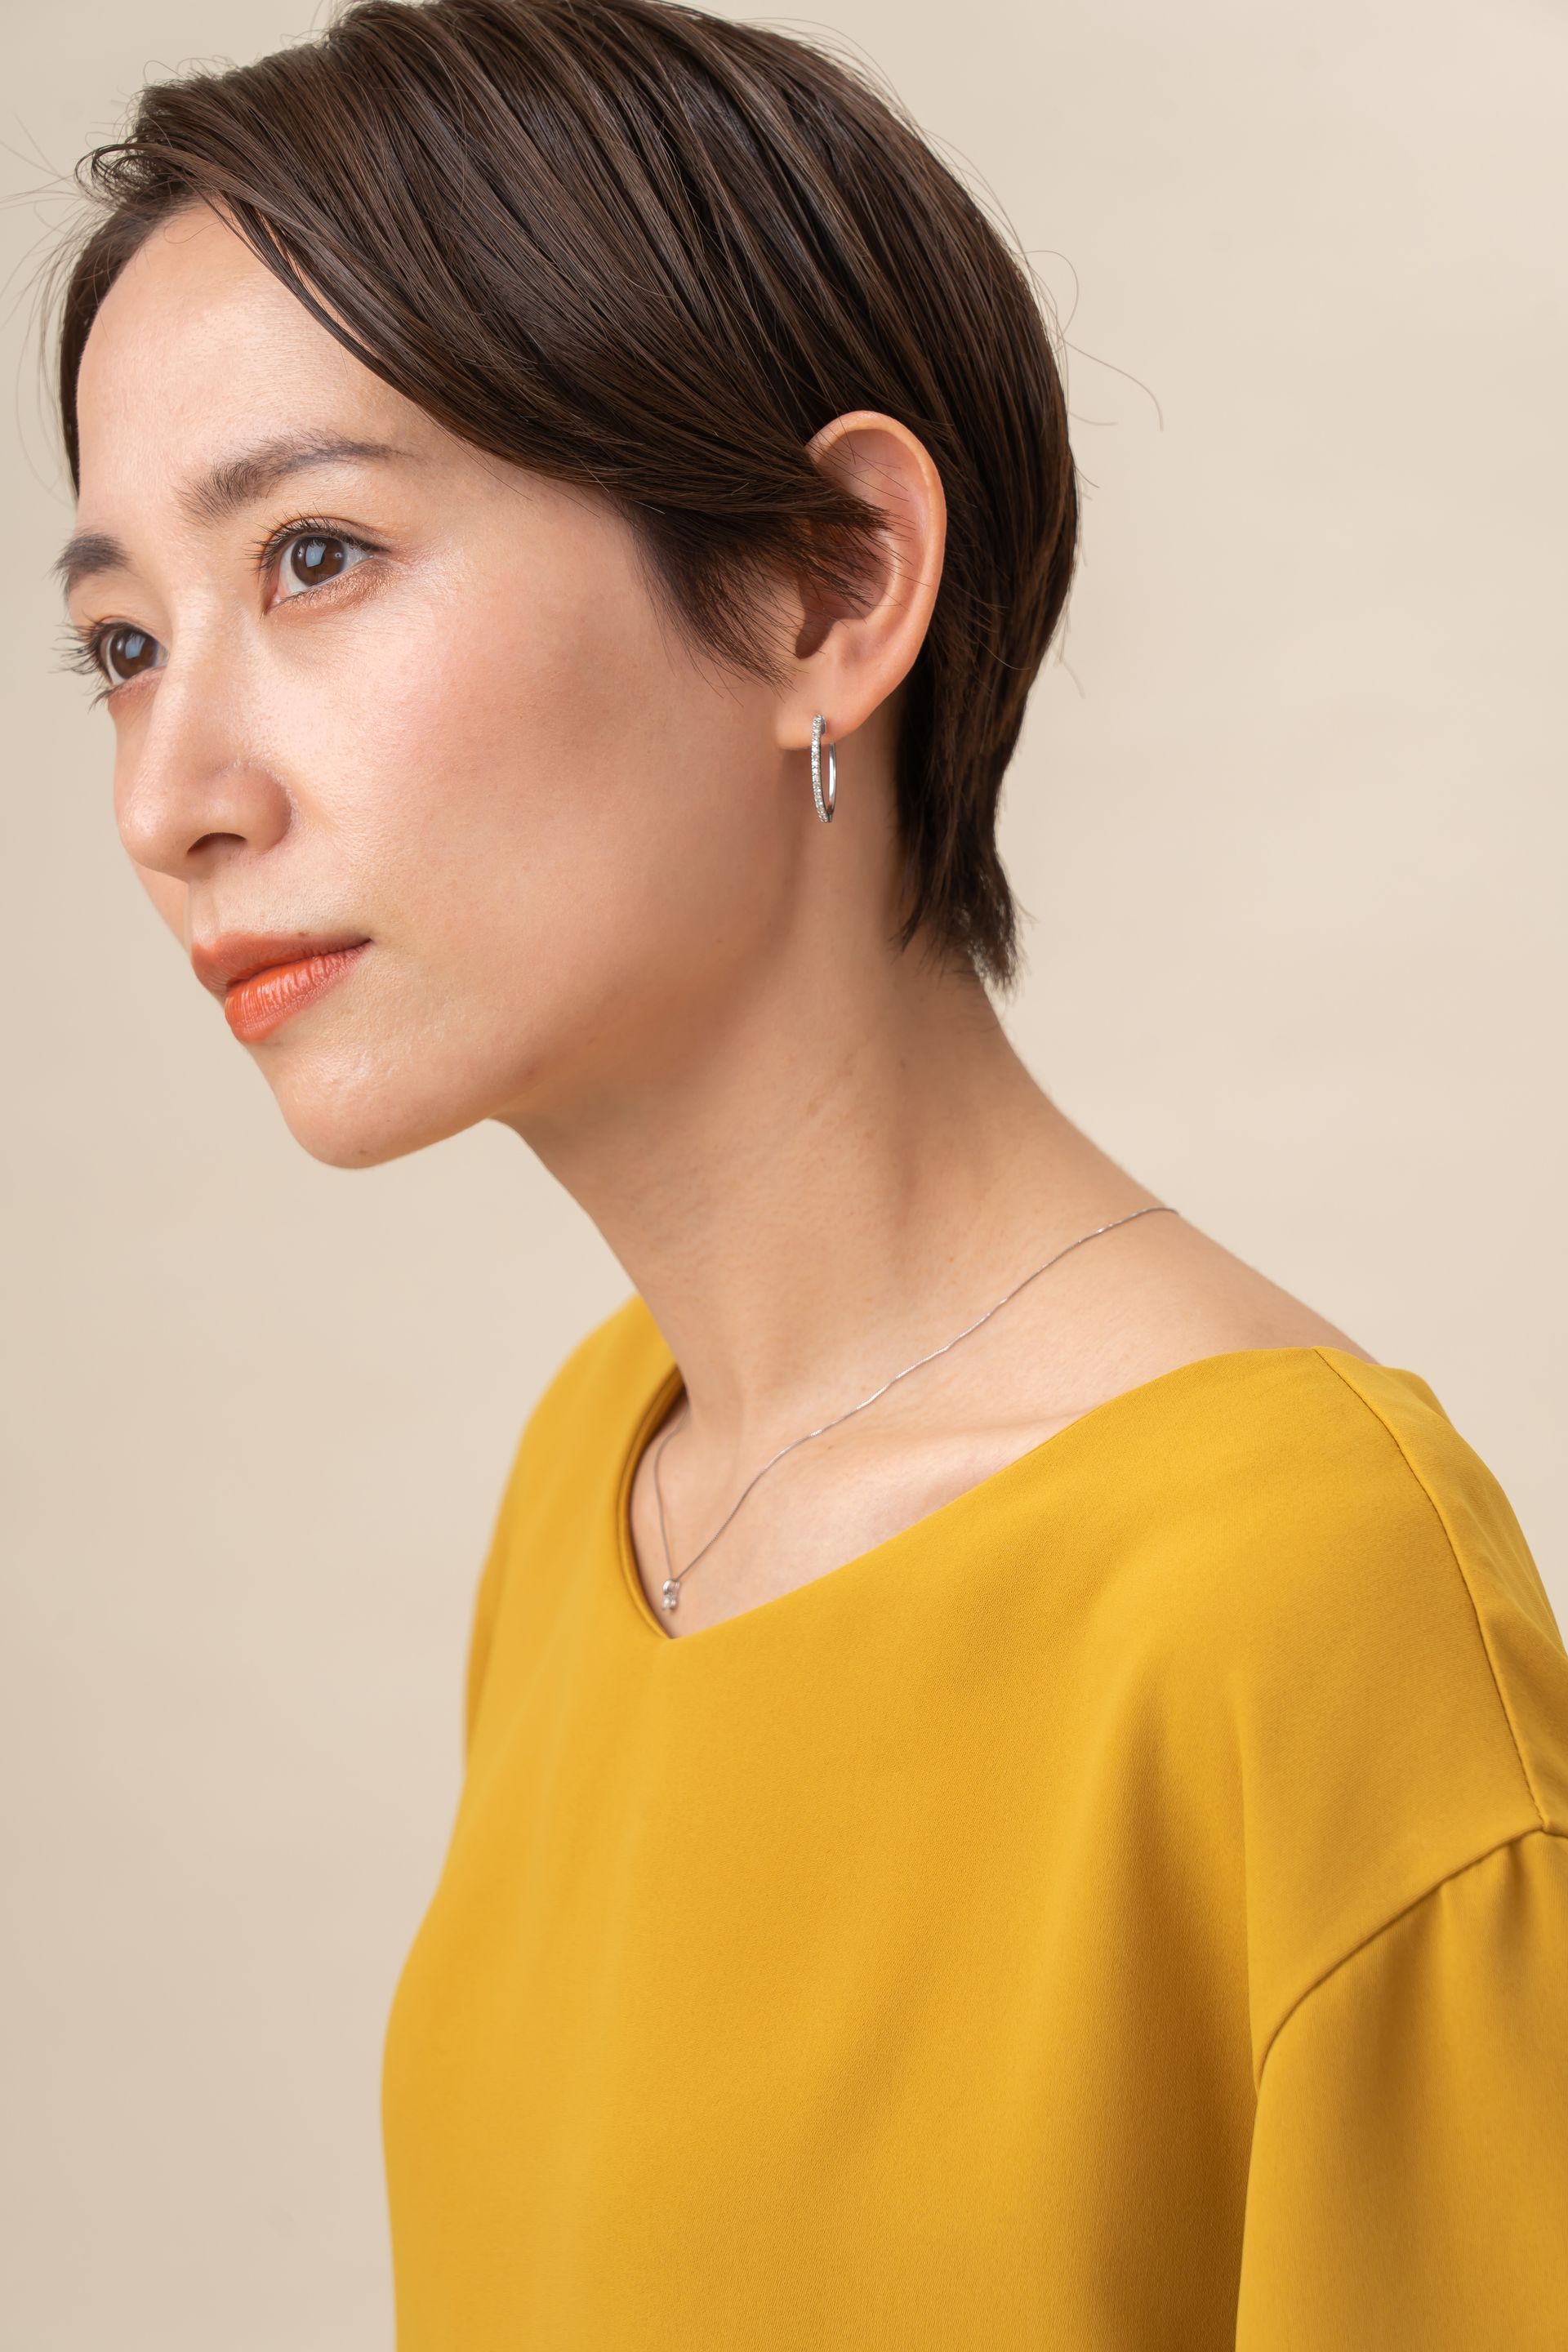 a woman with short hair is wearing a yellow shirt and earrings .